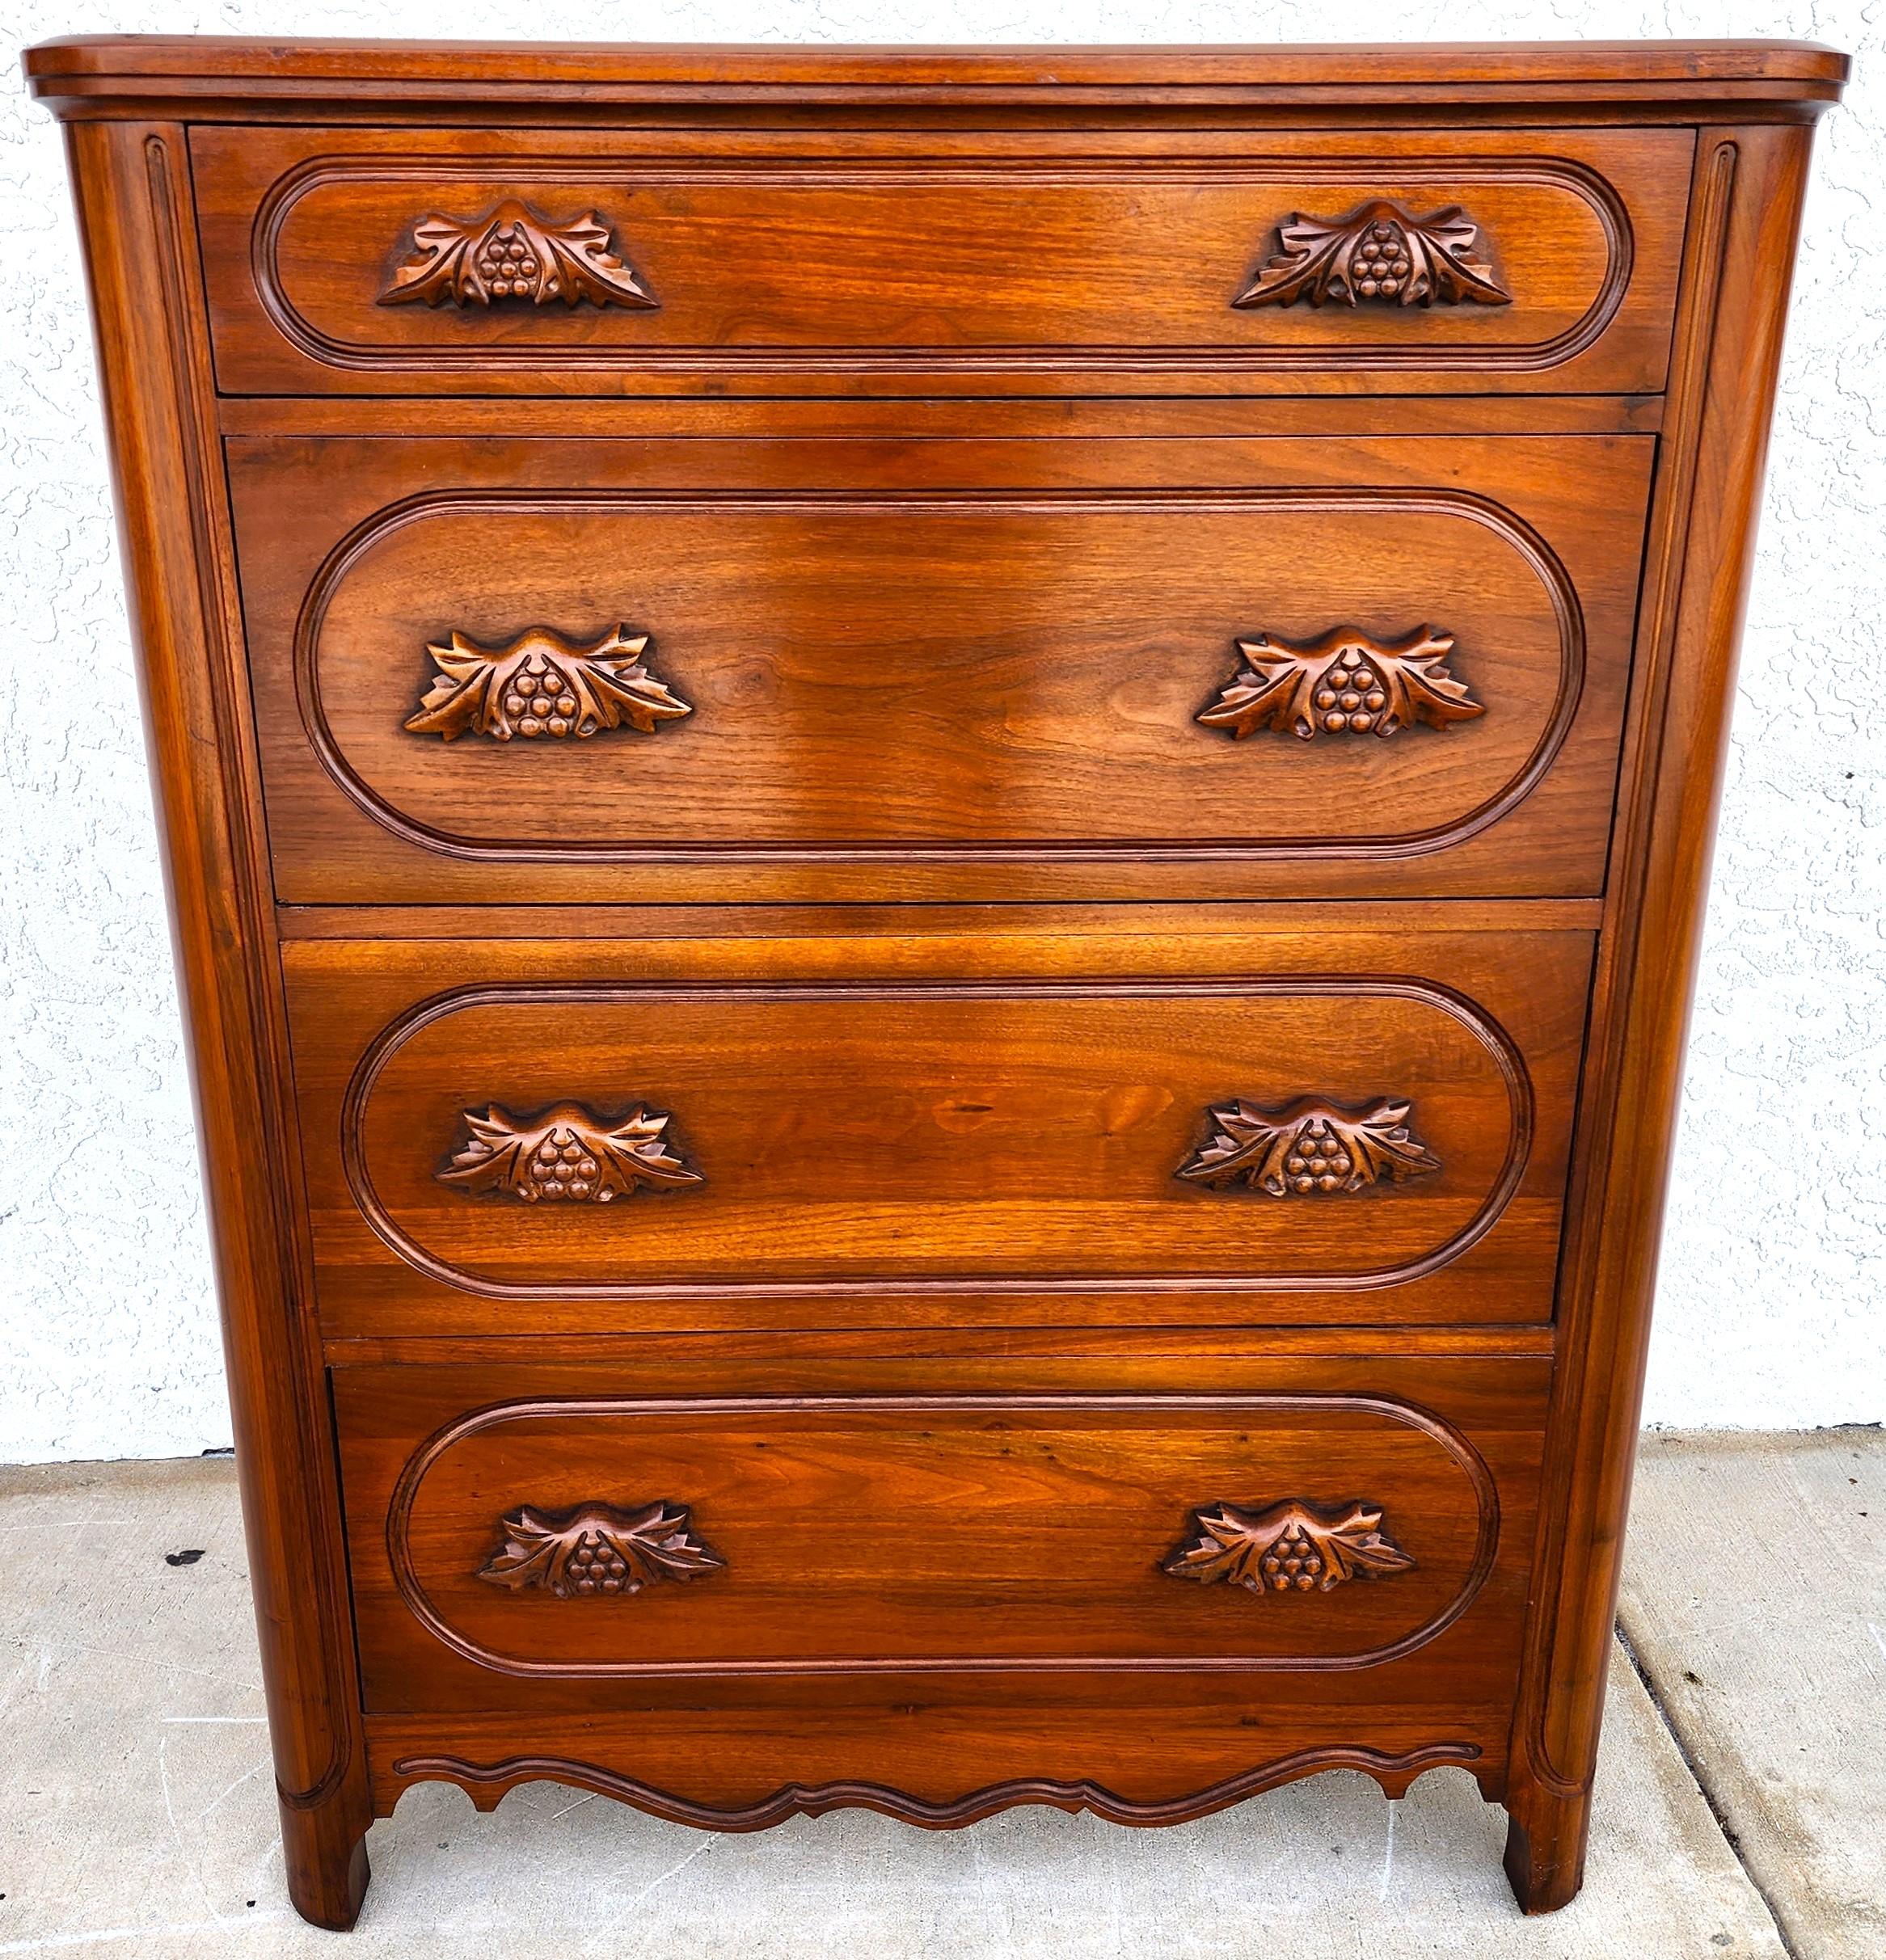 For FULL item description click on CONTINUE READING at the bottom of this page.

Offering One Of Our Recent Palm Beach Estate Fine Furniture Acquisitions Of An
Antique Dresser Highboy Solid Walnut by Davis Cabinet Co

Approximate Measurements in